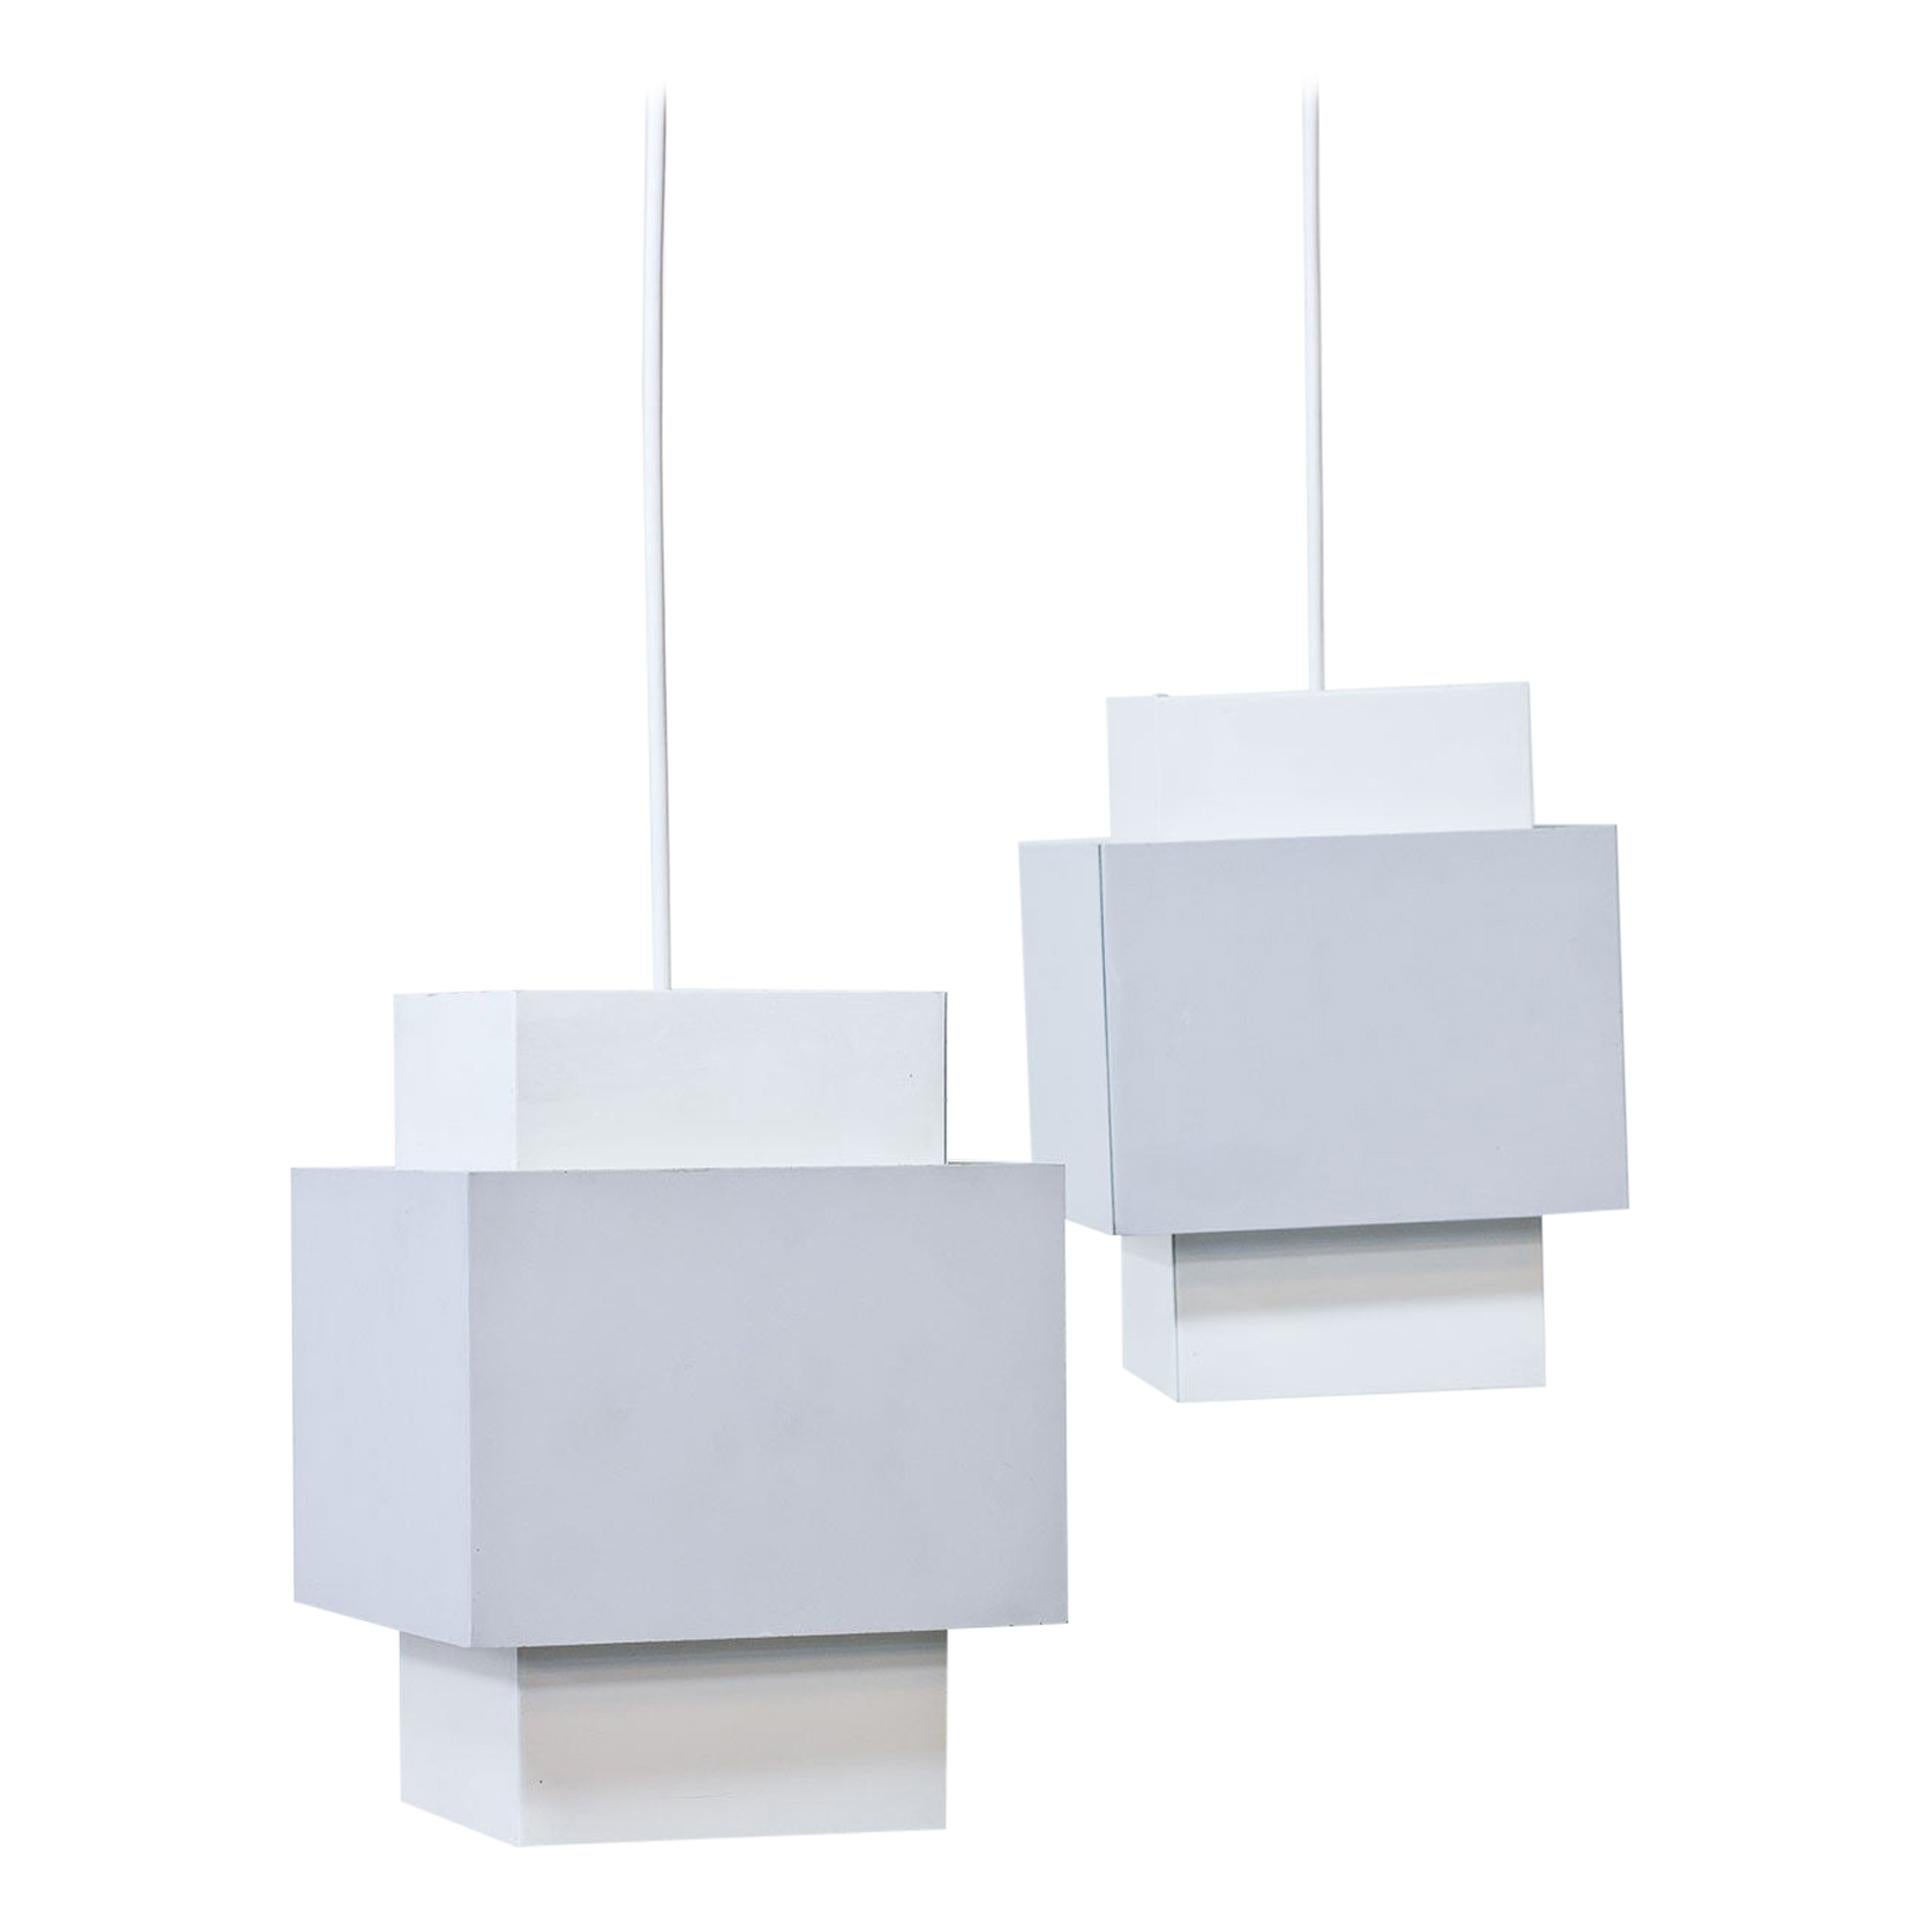 Pair of "Selectra" Pendant Lamps by Hans-Agne Jakobsson